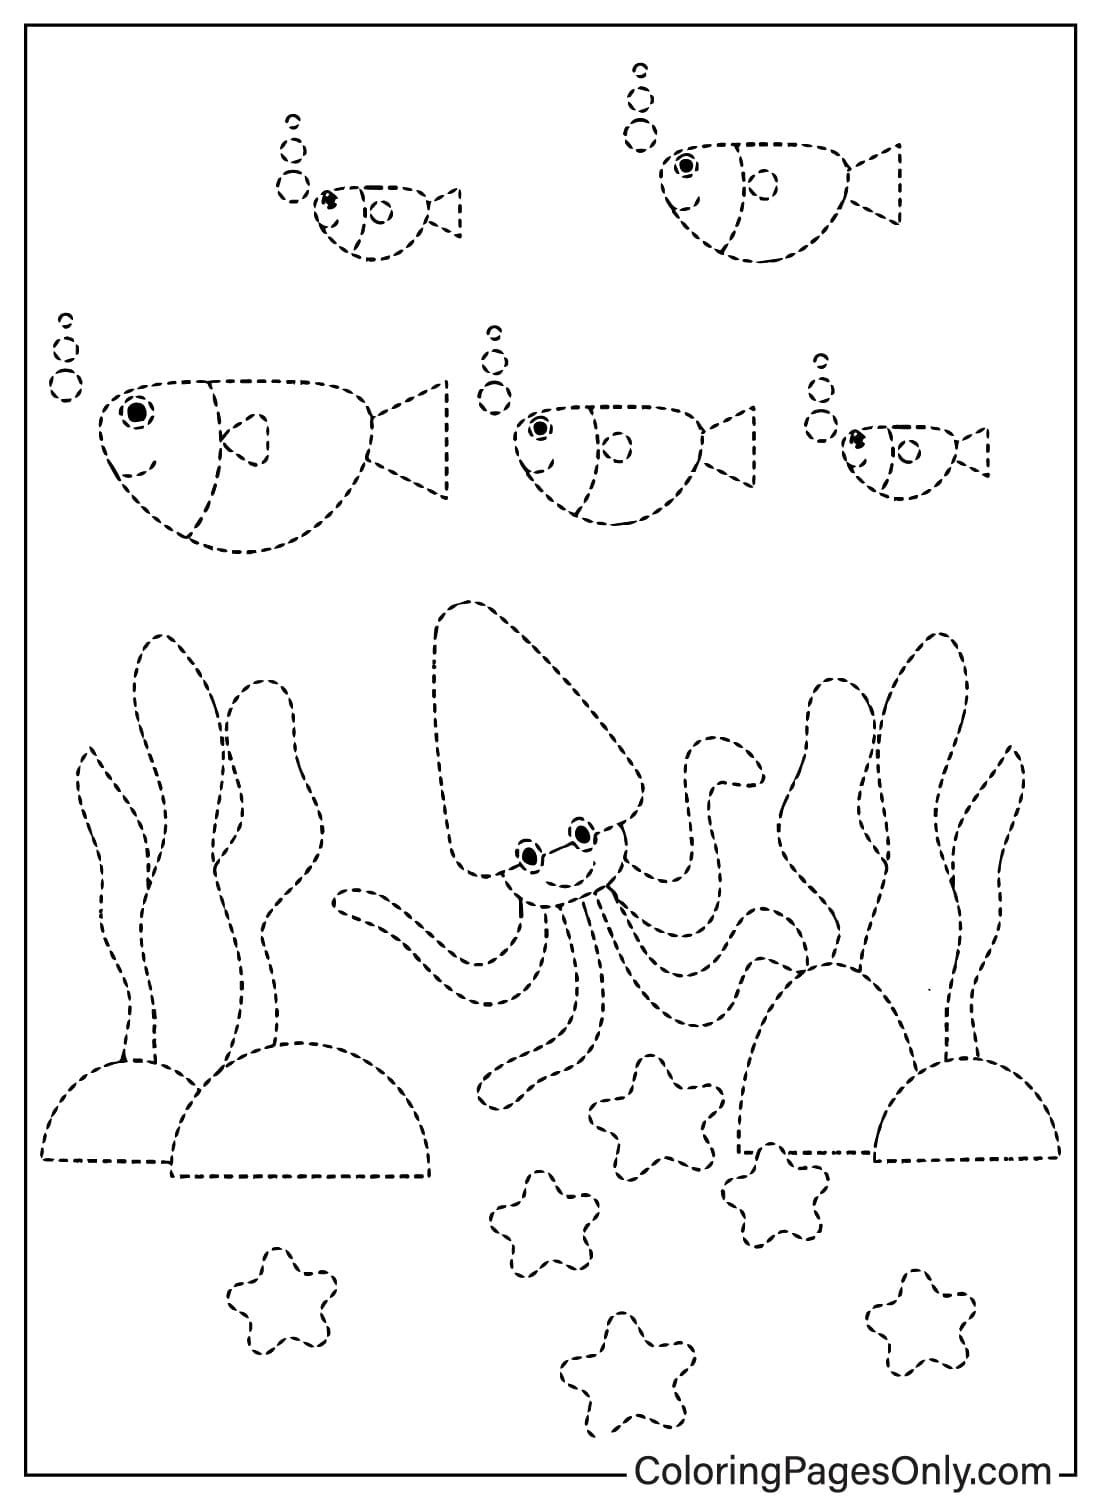 Tracing Coloring Page Free Printable from Tracing